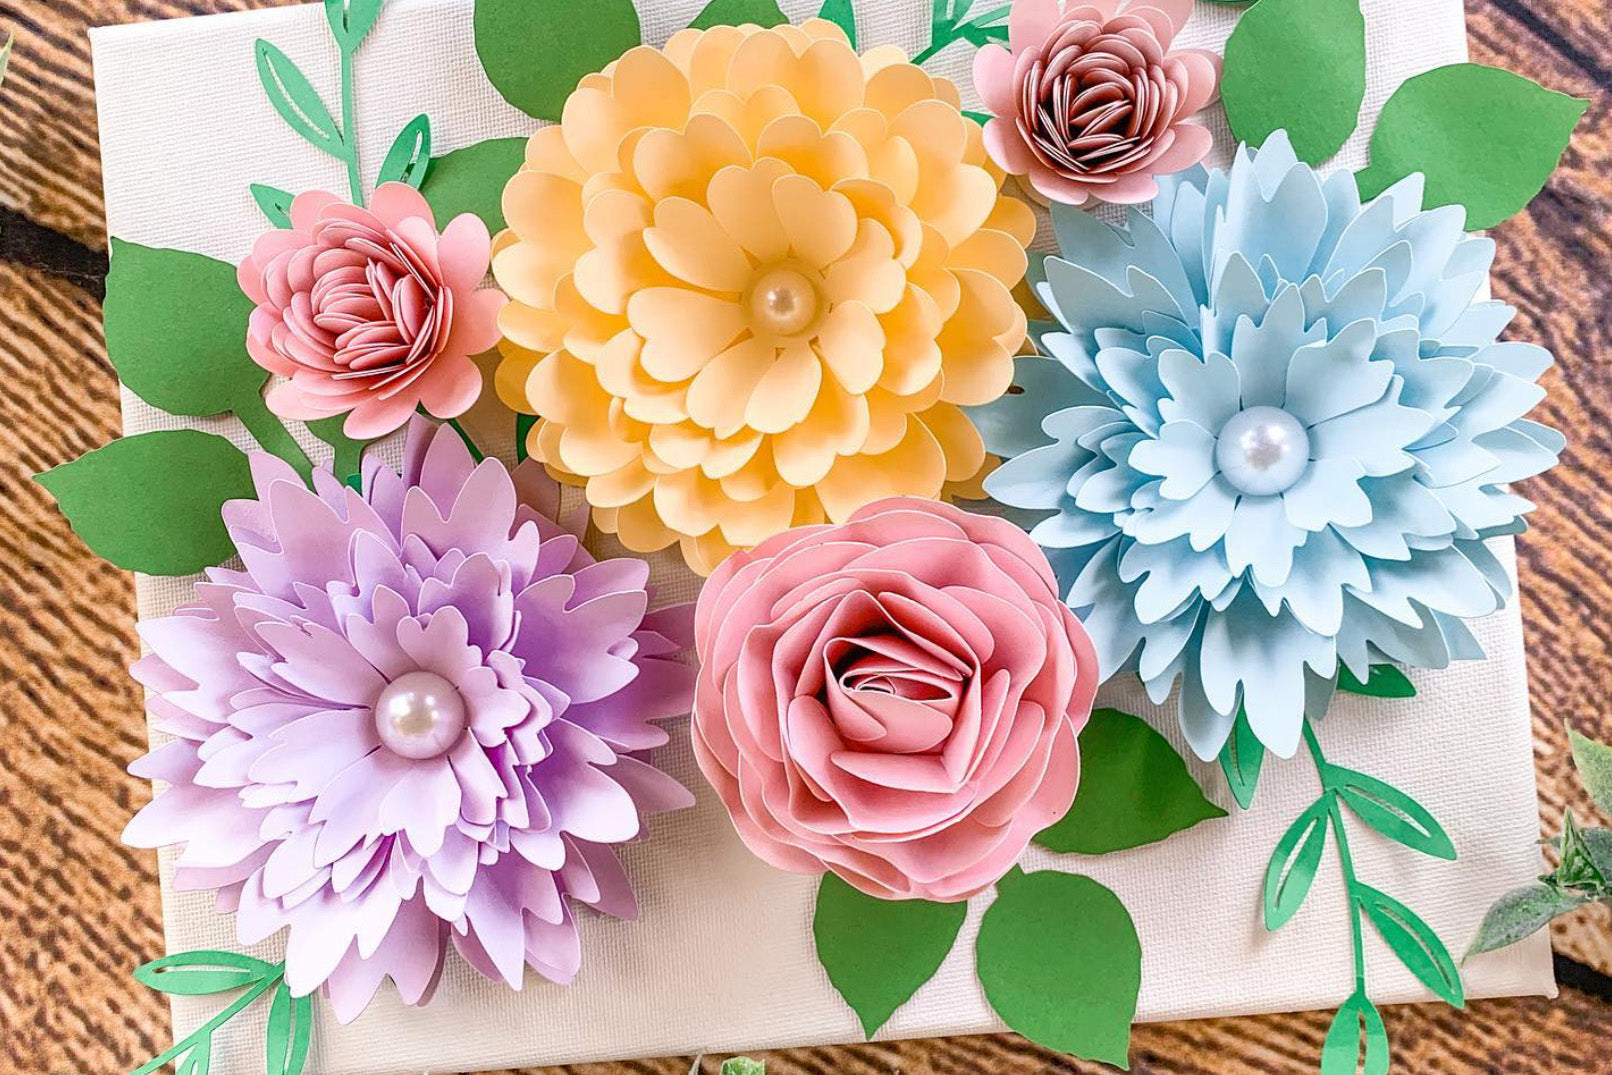 Pink 3D Paper Flowers Decorations for Wall, Wedding, Crafts (2